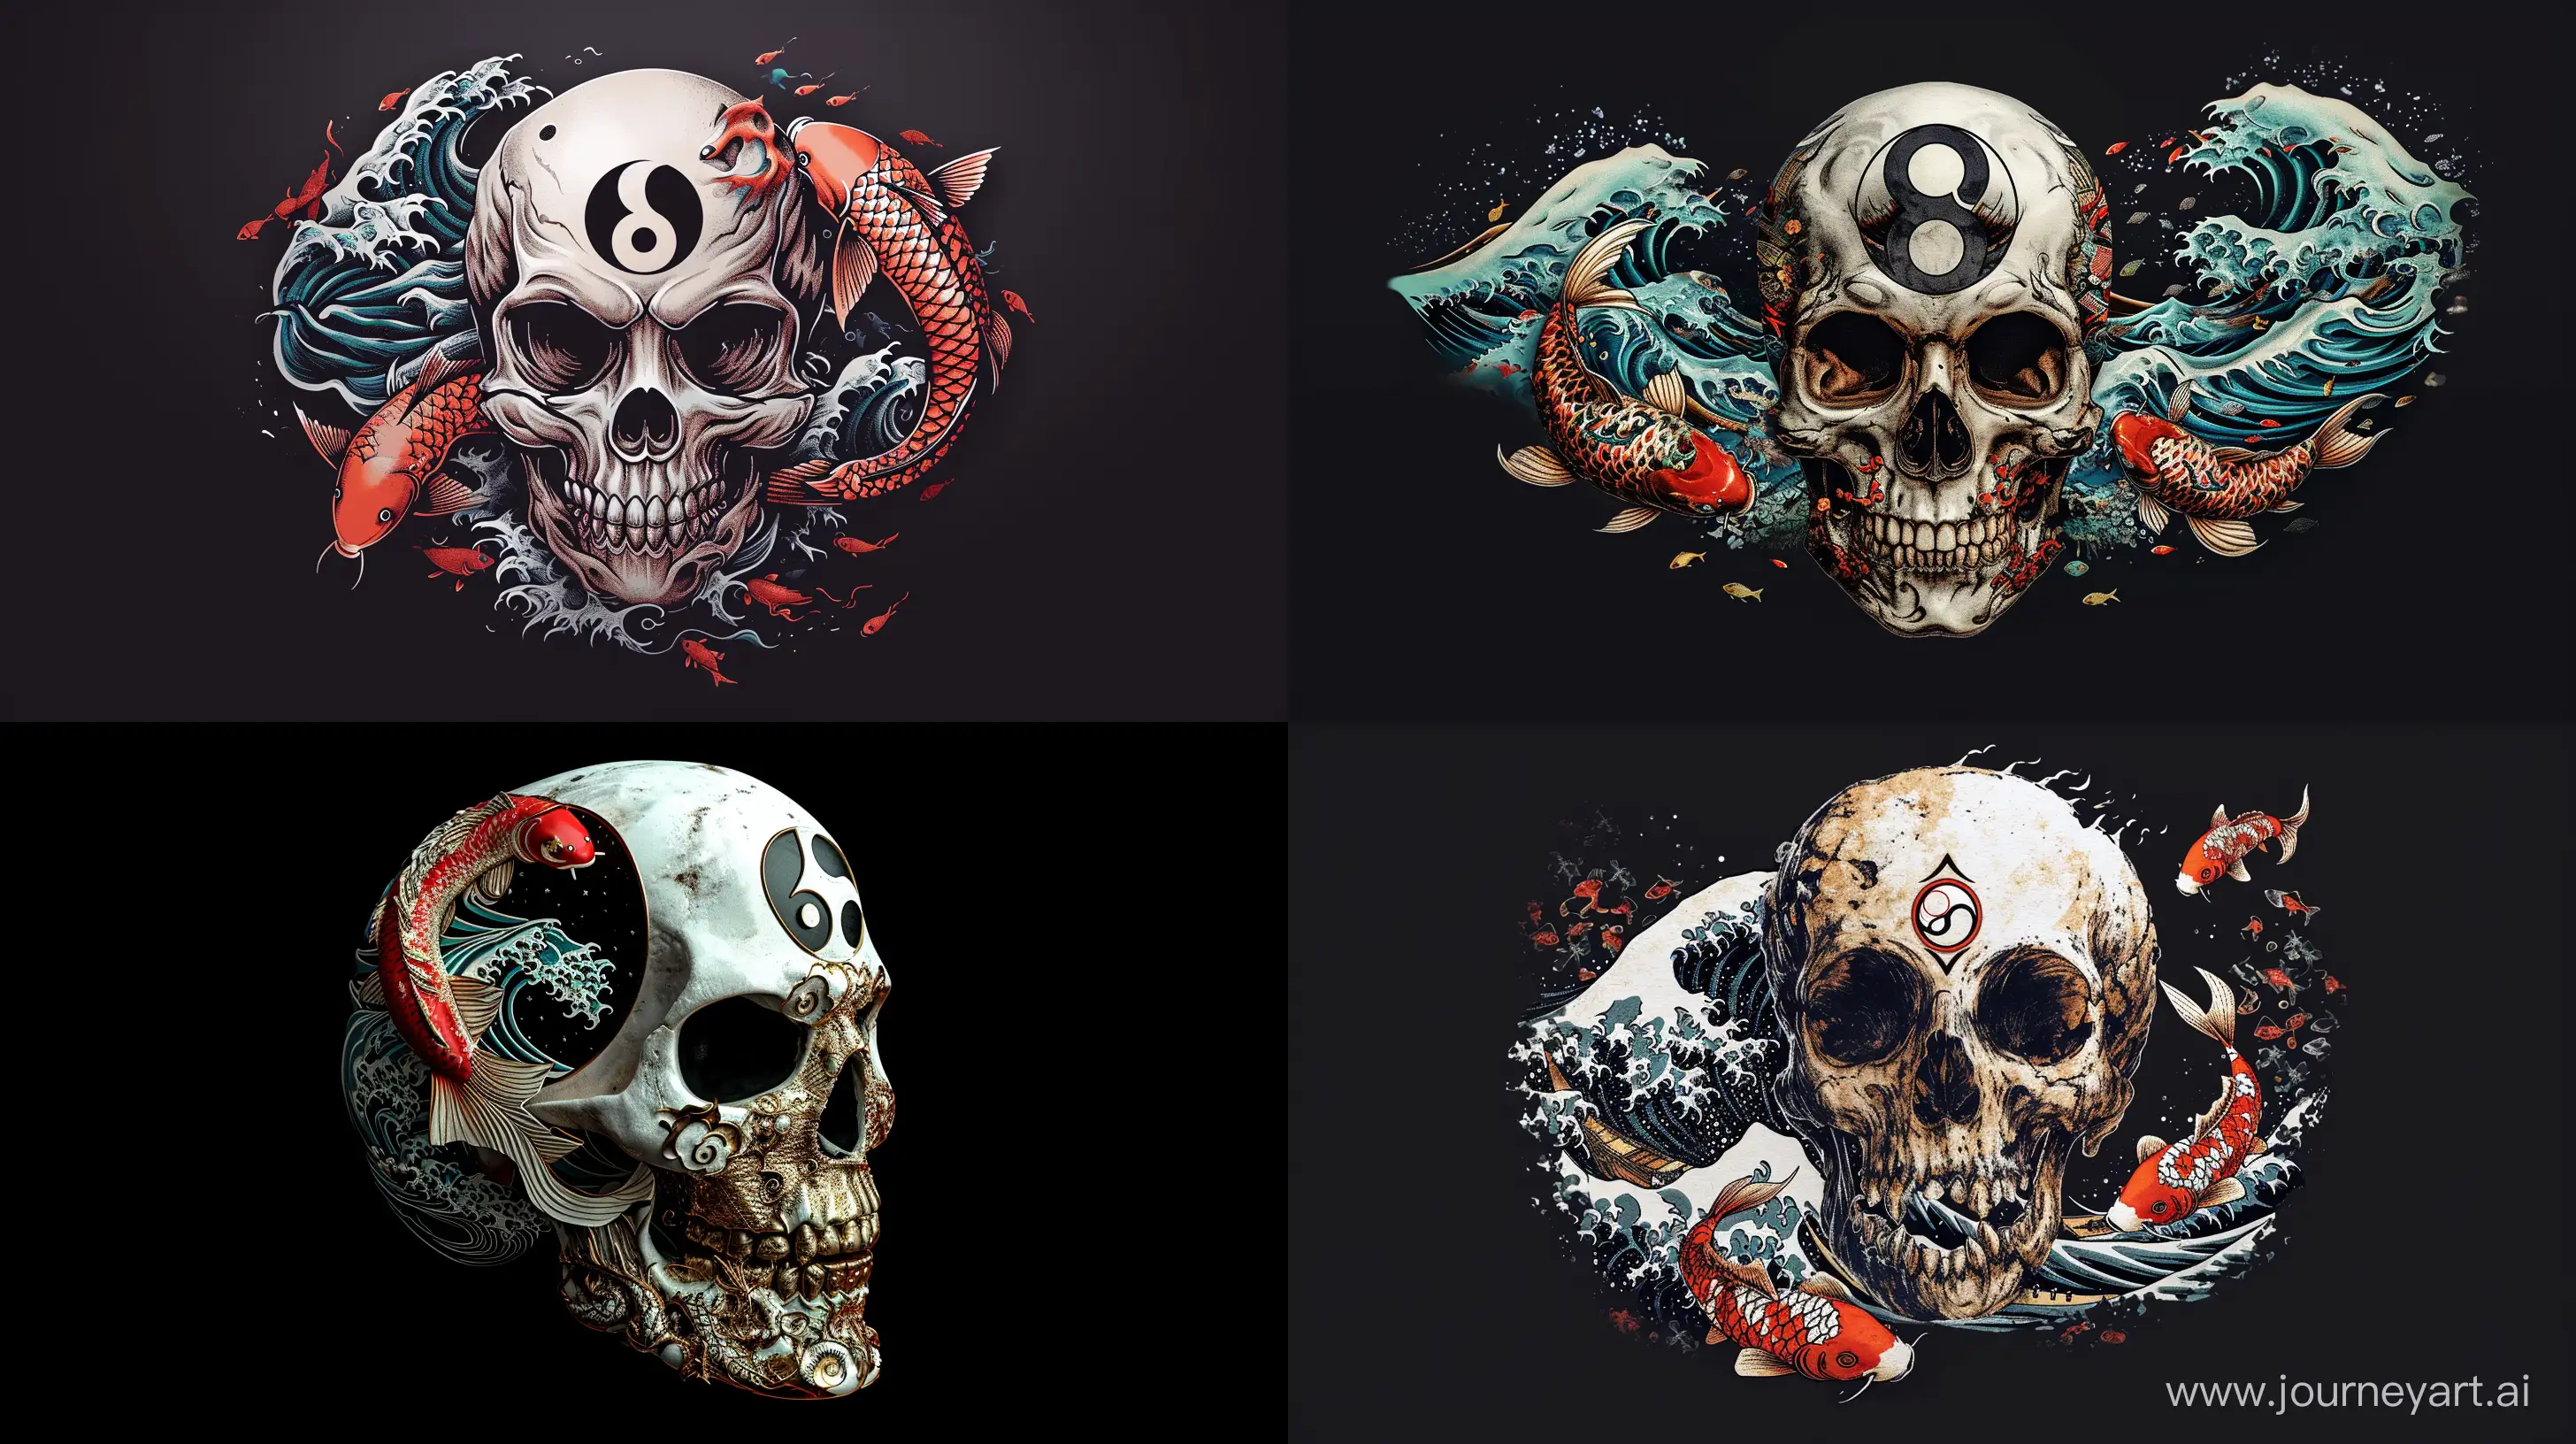 Japanese-Demon-Skull-with-Wave-Koi-Fish-and-Yin-Yang-Elements-on-Black-Background-in-4K